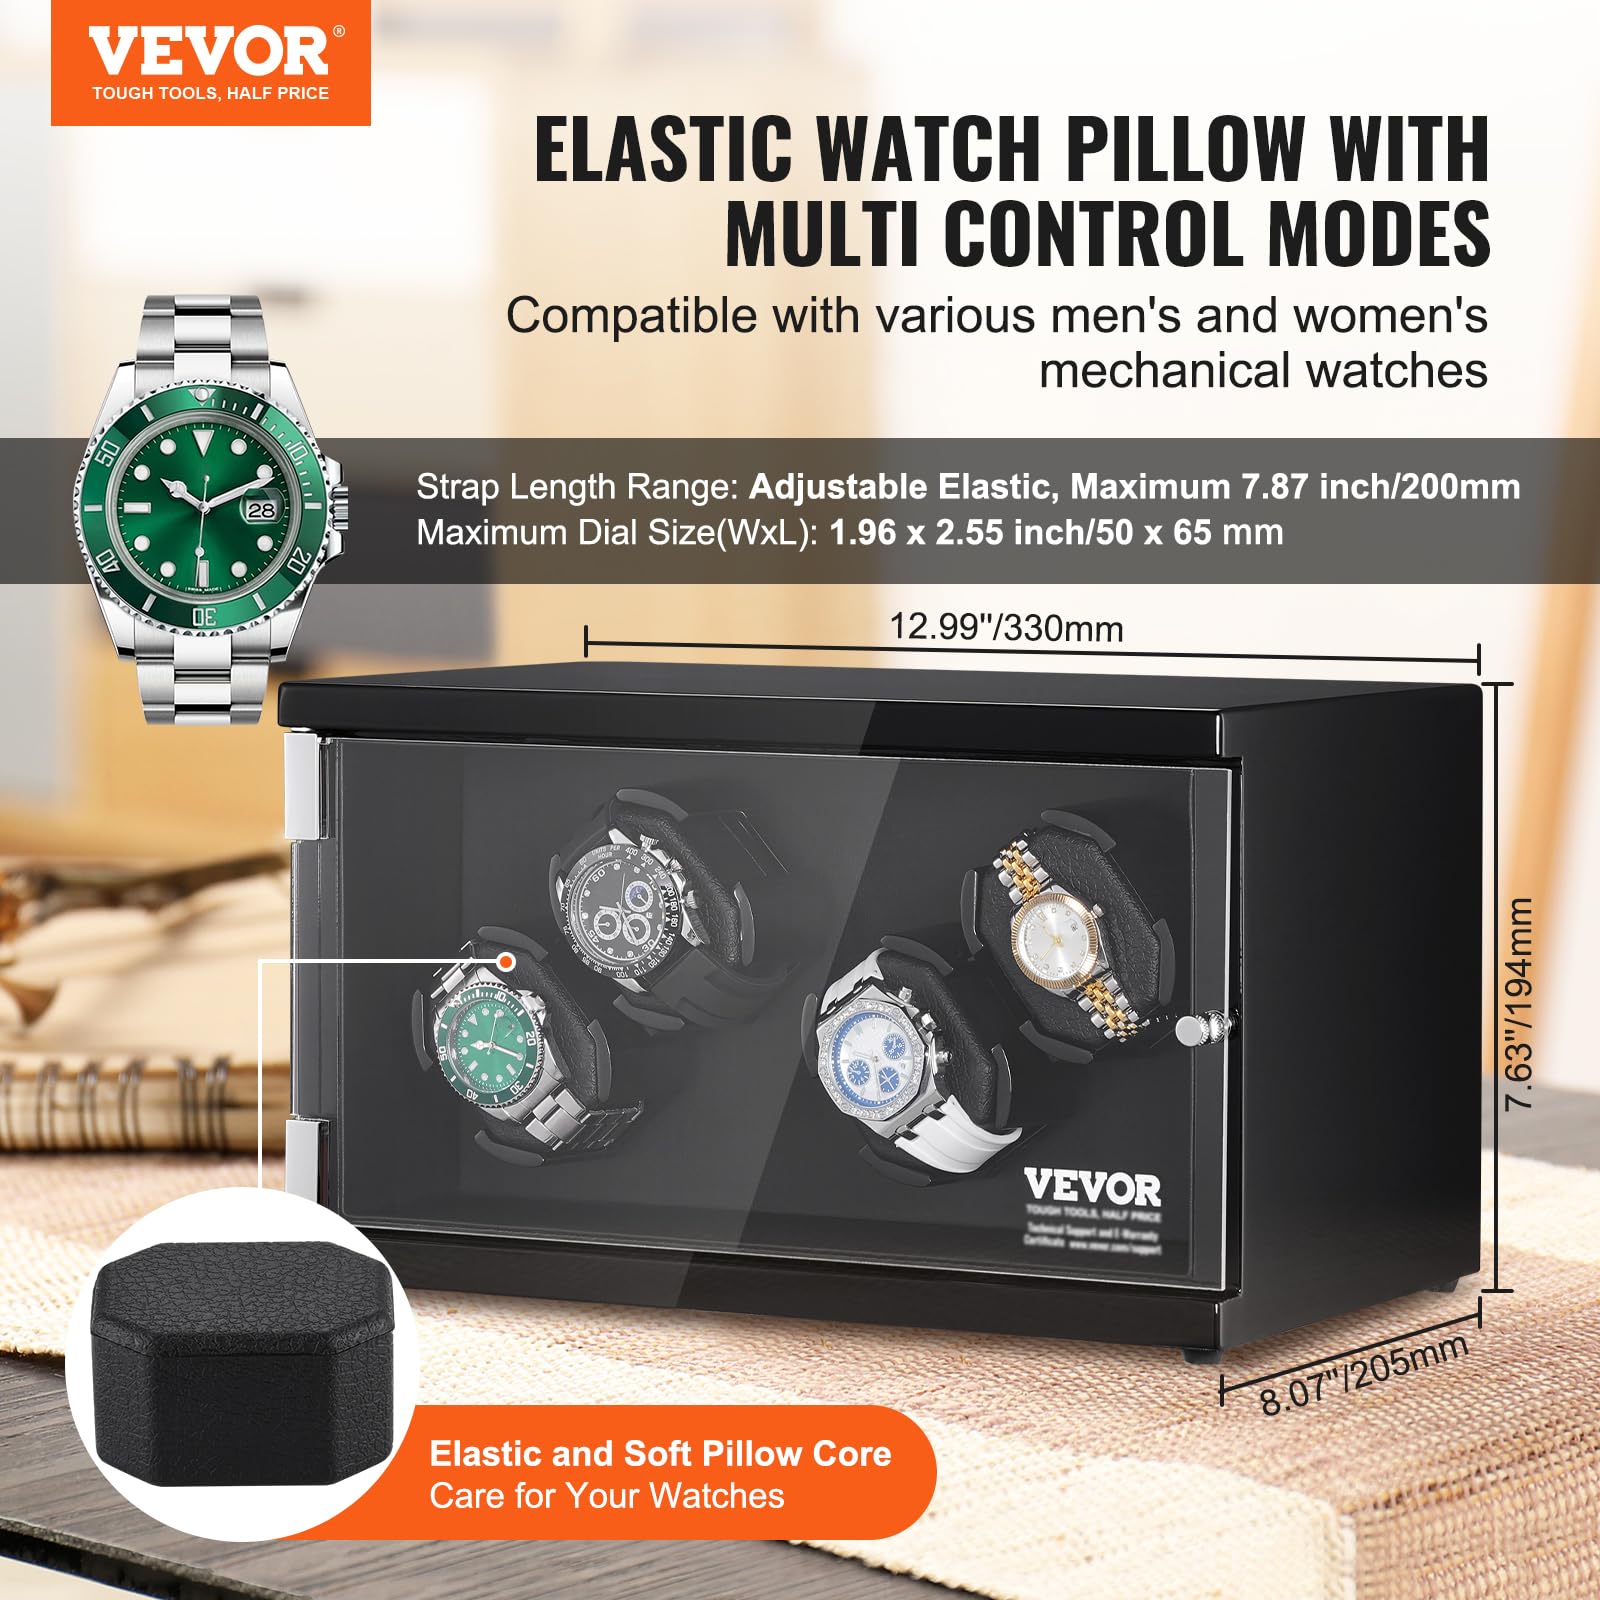 VEVOR Watch Winder, Rotating Watch Box for High-End Automatic Watches, 4 Watch Winder Case with Quiet Japanese Motors, LED Light, Adjustable Direction and Speed, Multi Modes